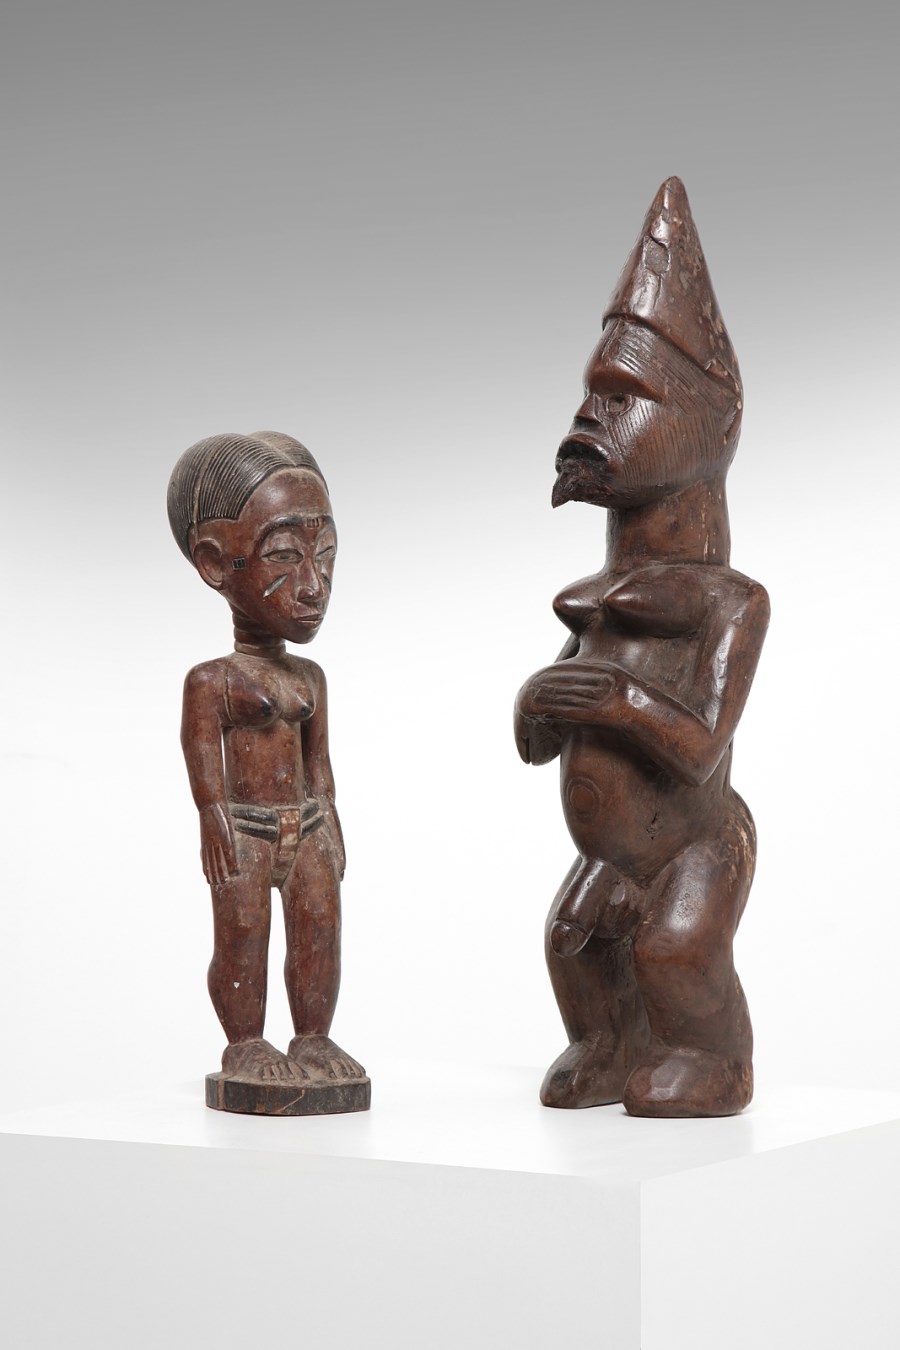 Two African statuettes
Ivory Coast and Congo (Arte Africana )